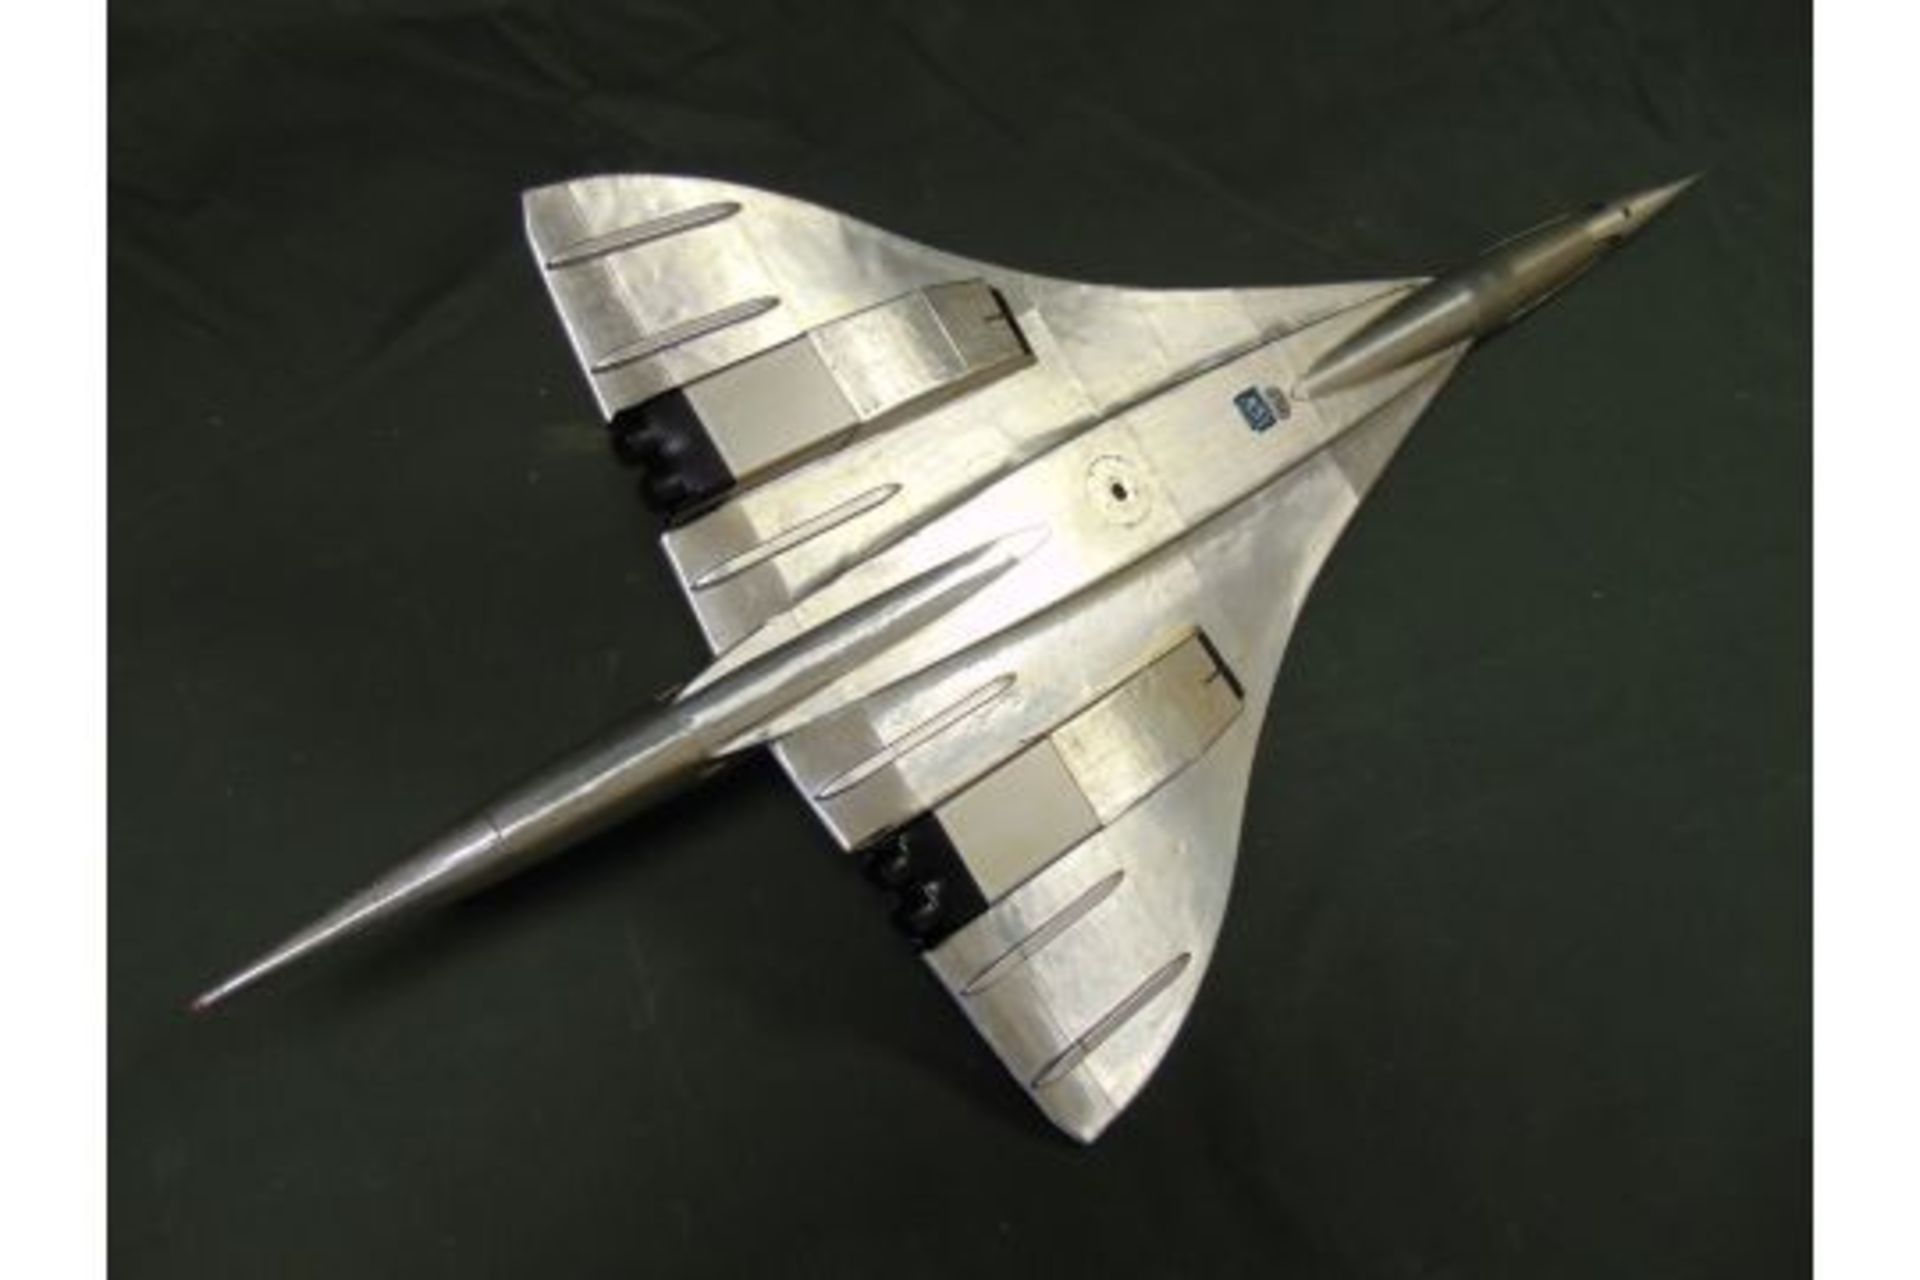 JUST LANDED A BEAUTIFUL!! Large Aluminium CONCORDE Model - Image 11 of 14